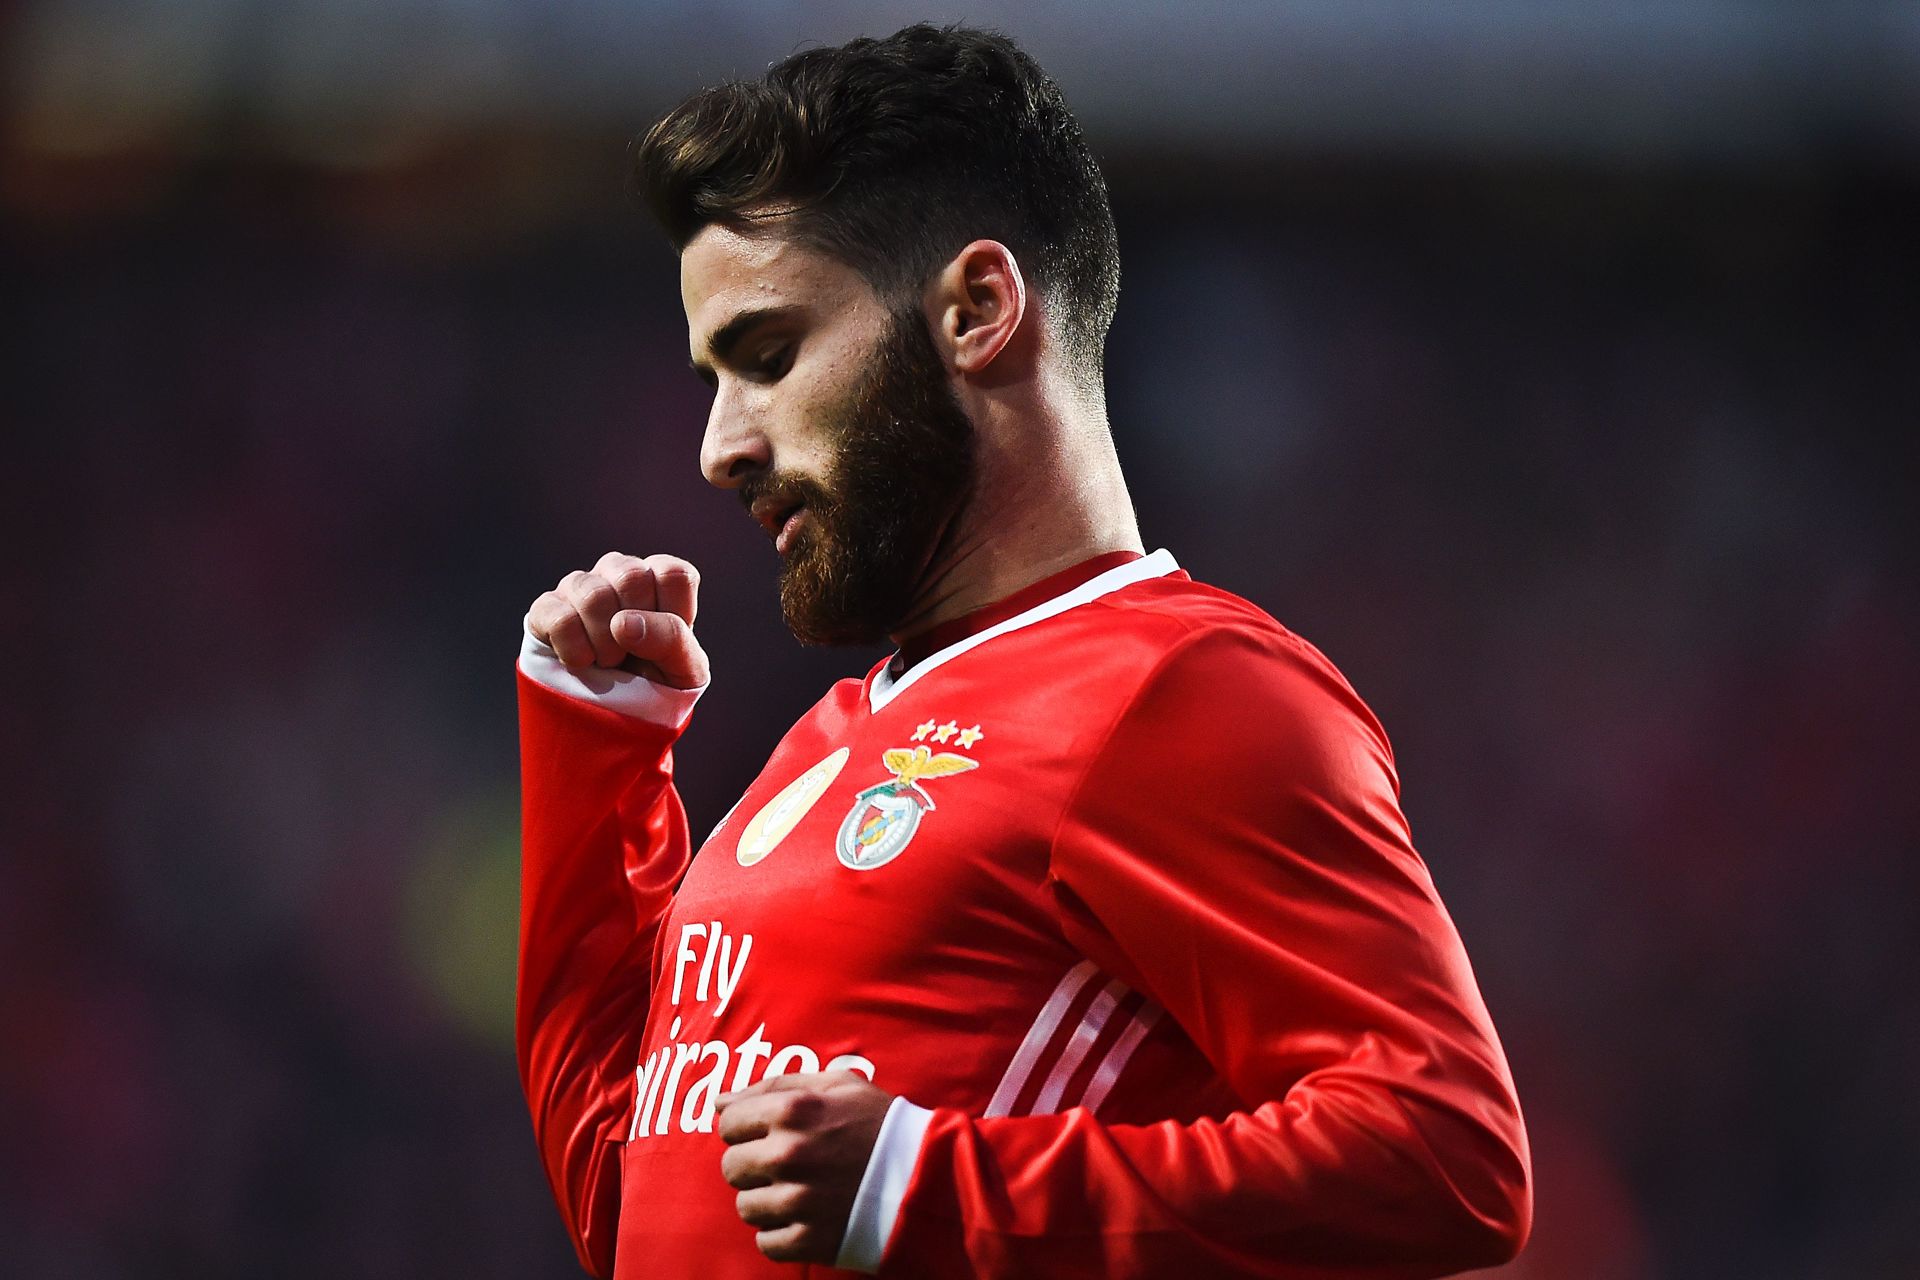 Rafa Silva has established as one of the key players for Benfica (Image credit: Google)